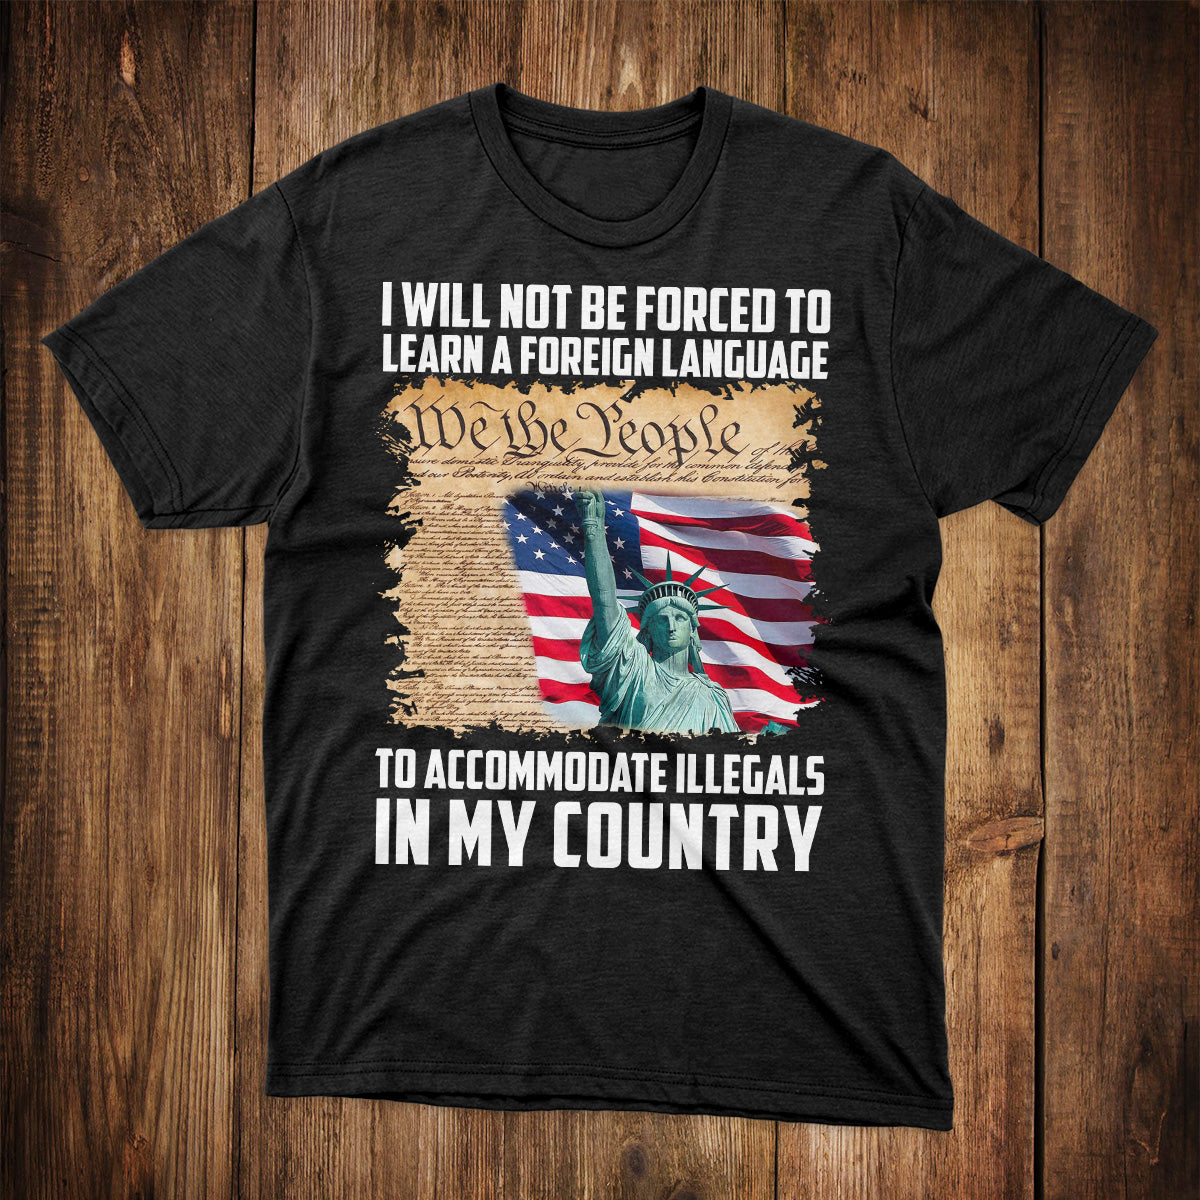 Statue Of Liberty American Flag T-Shirt I Will Not Be Forced To Learn A Foreign Language Shirt USA Patriotic Gift